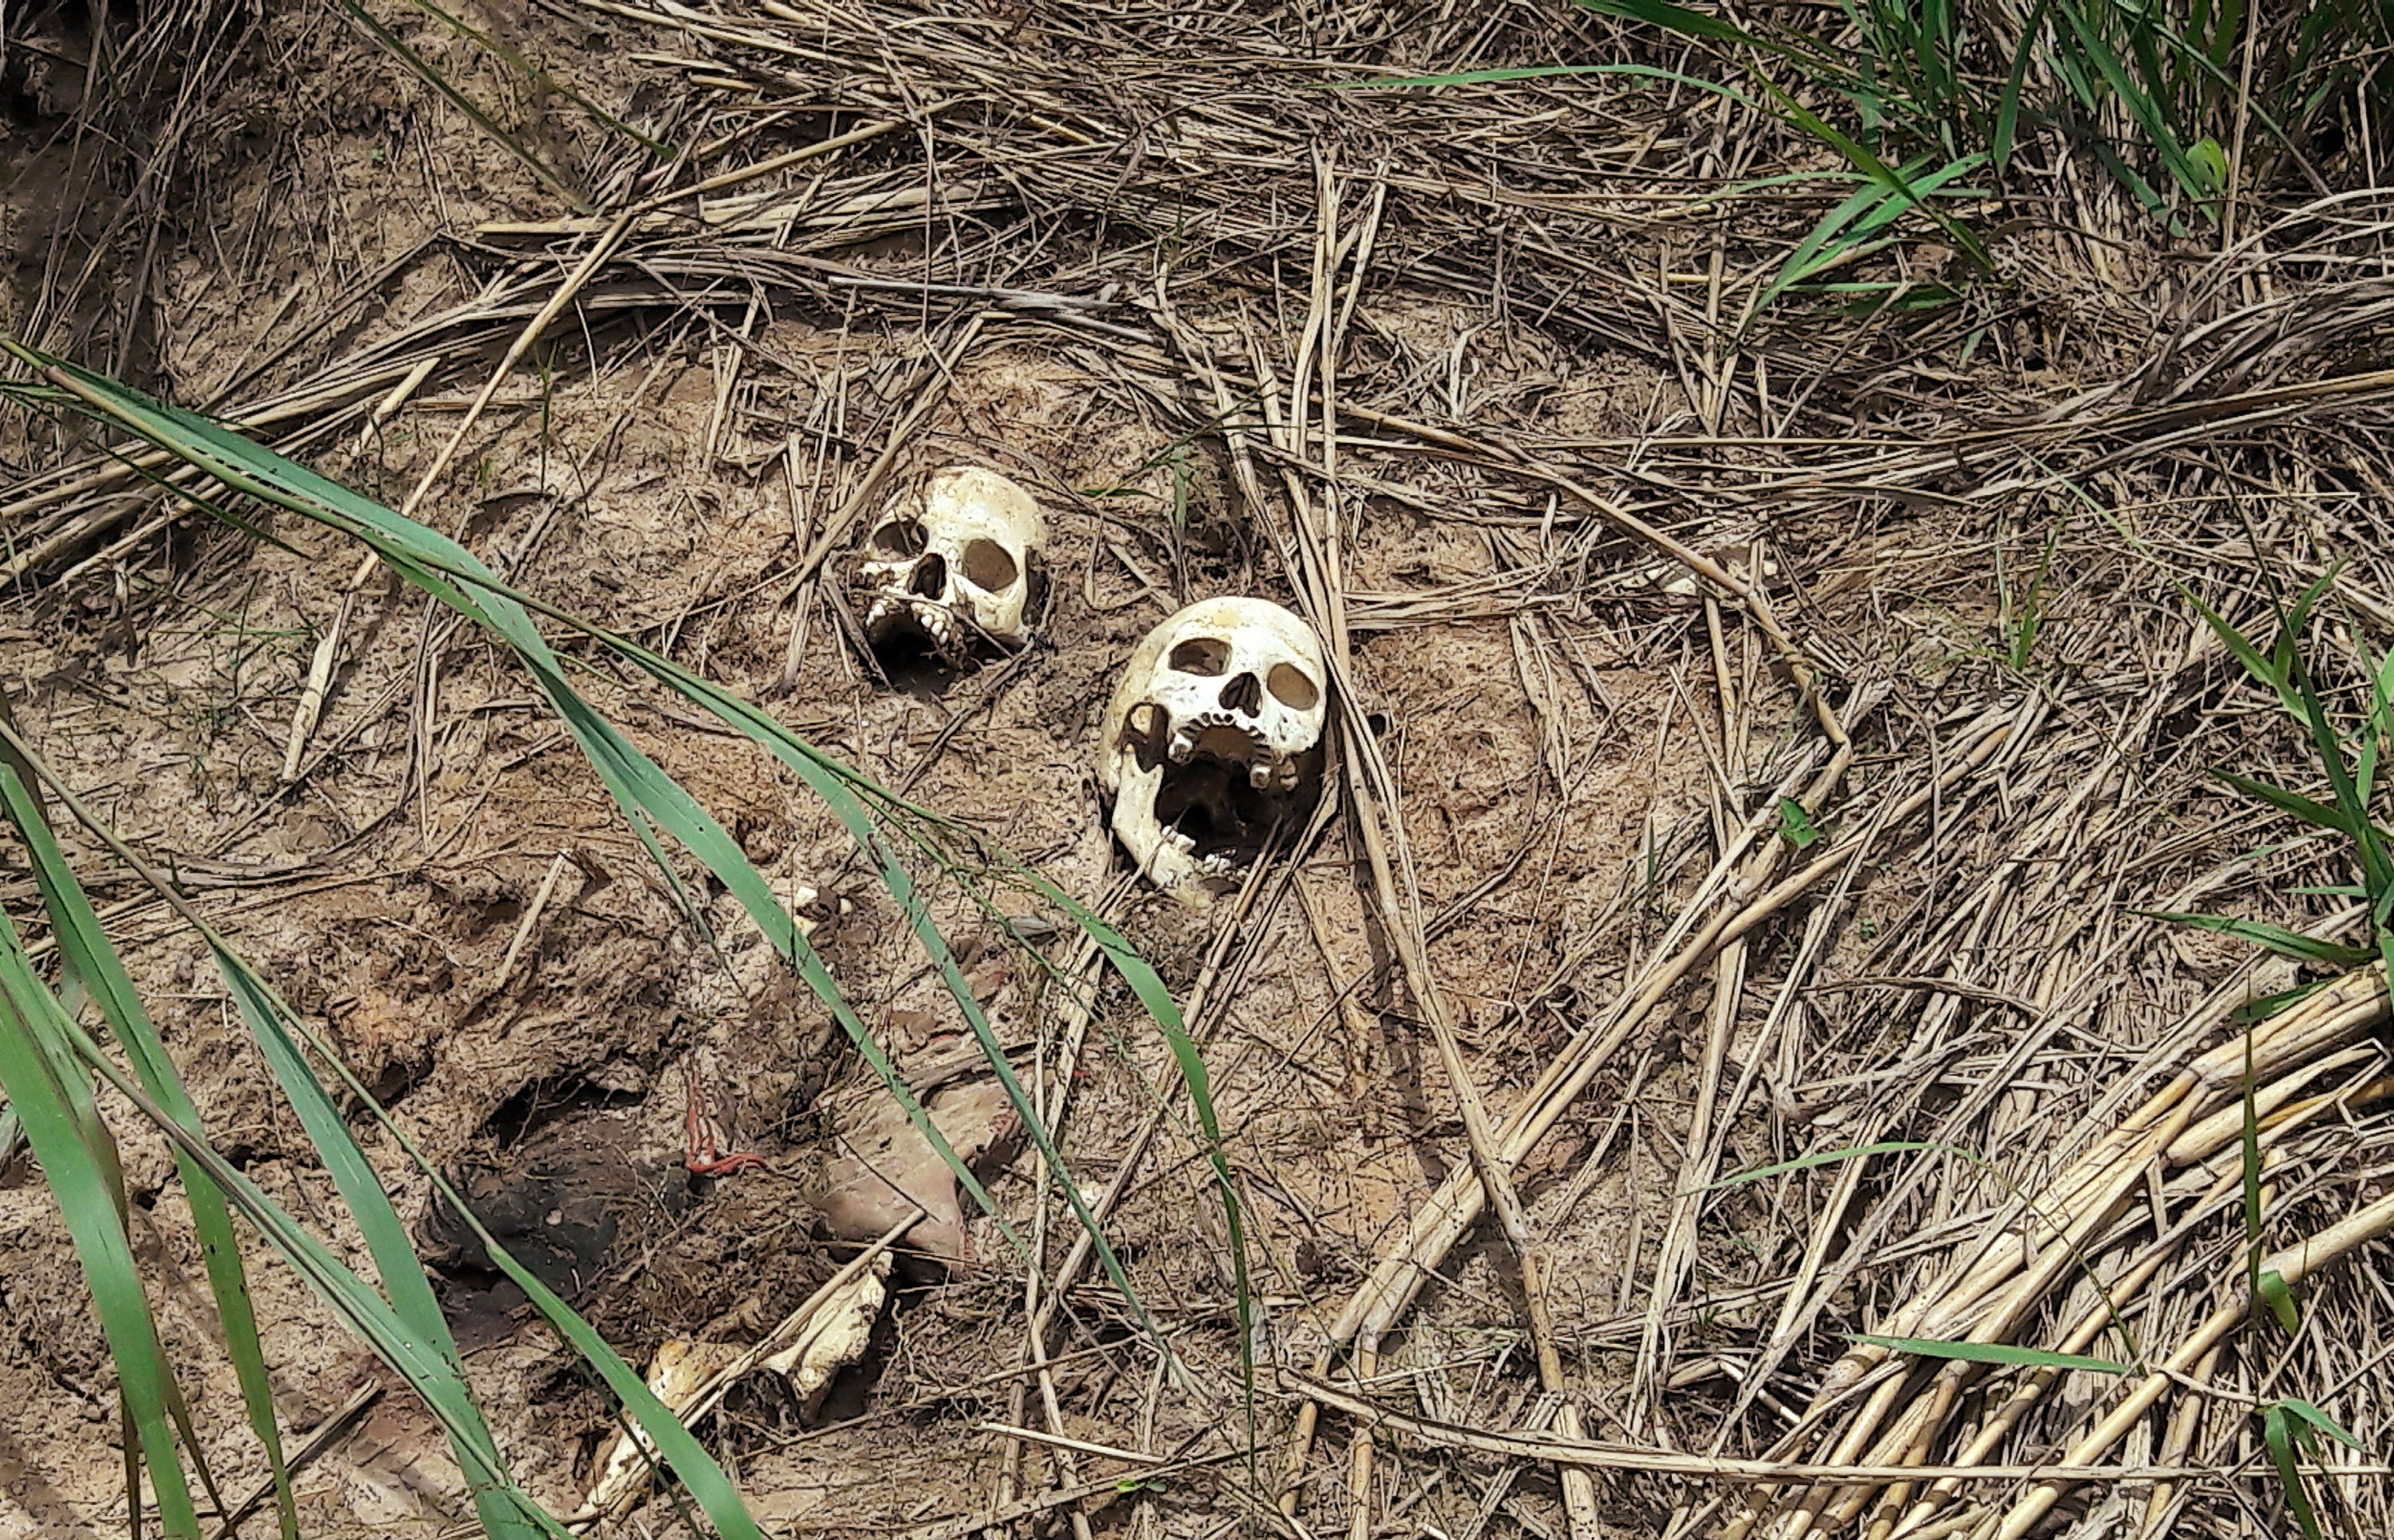 Bishop warns of 'permanent state of insecurity' in the Democratic Republic of the Congo as UN discovers 13 more mass graves 